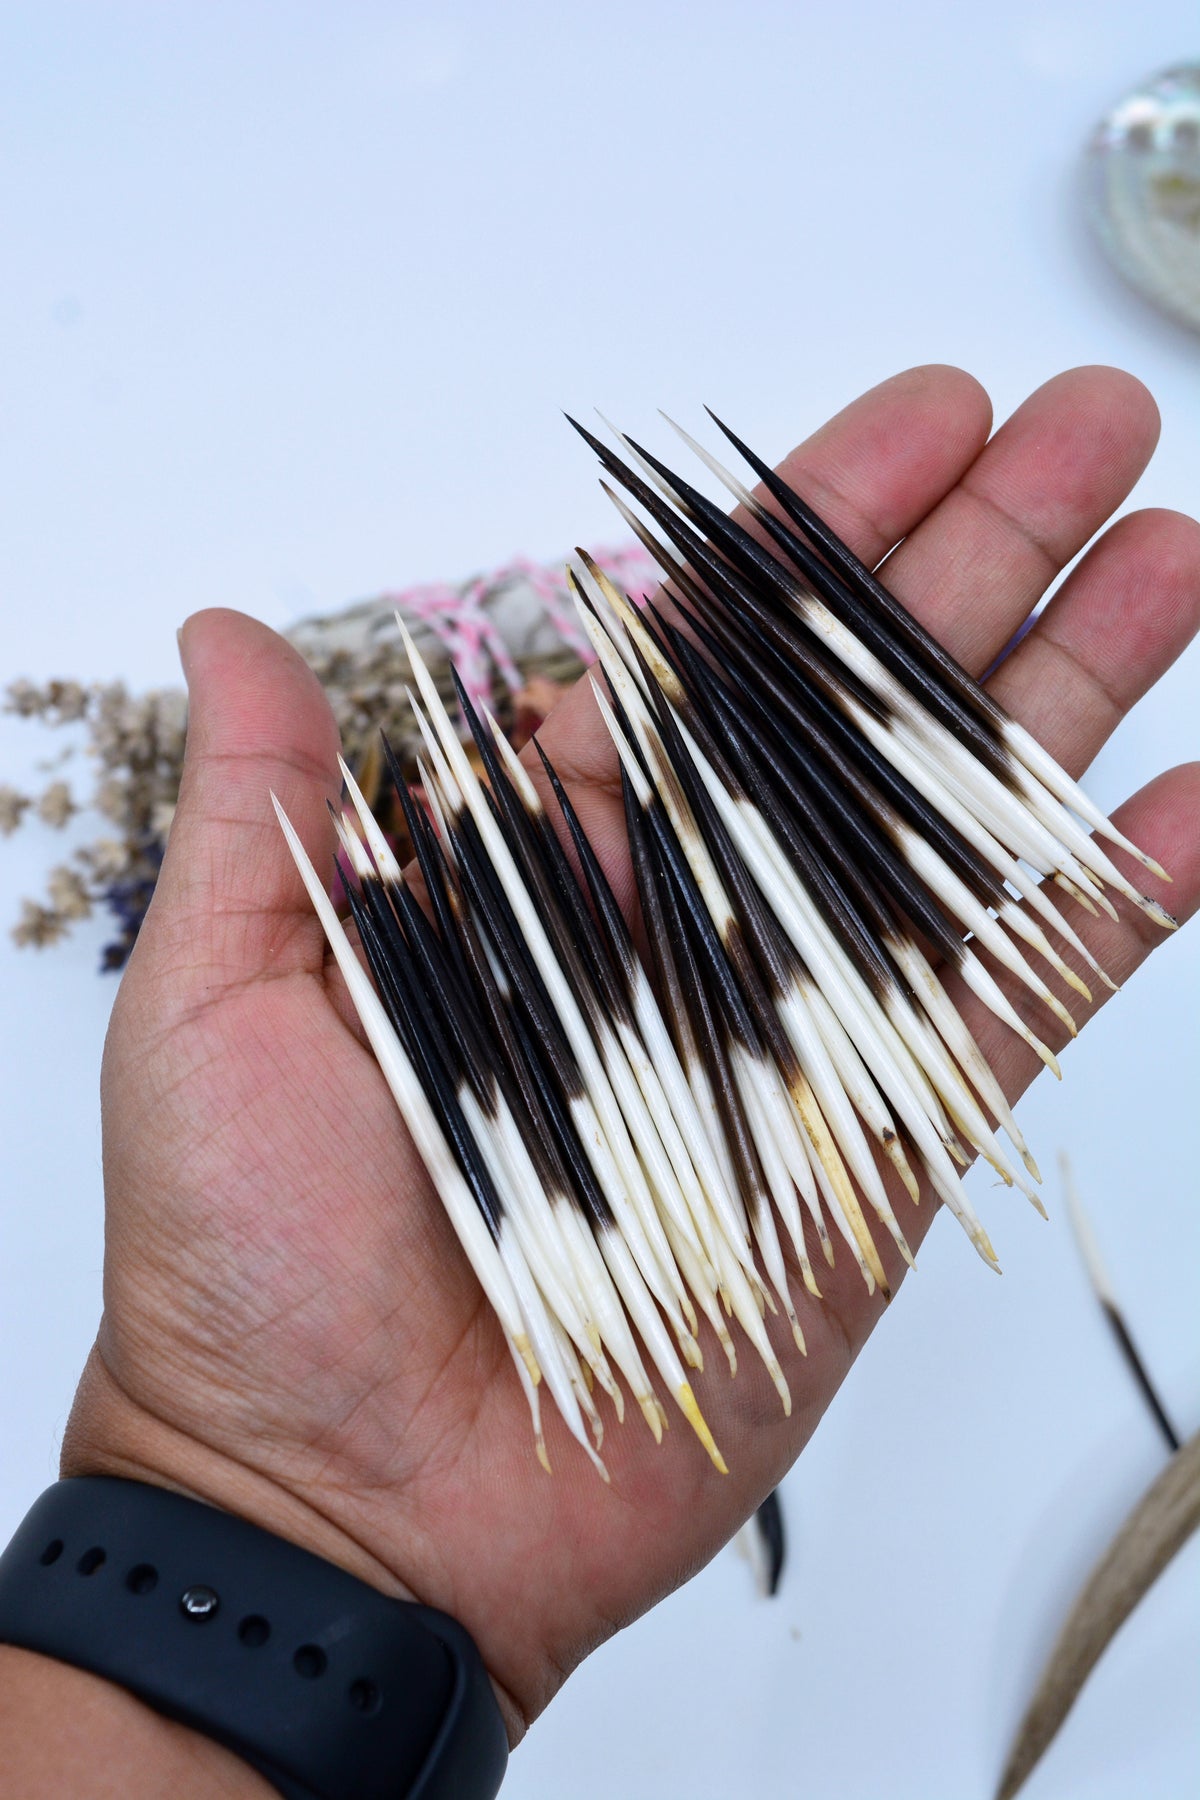 Authentic African Porcupine Quills, 2.5-3.5 long, 5 Tiny pcs